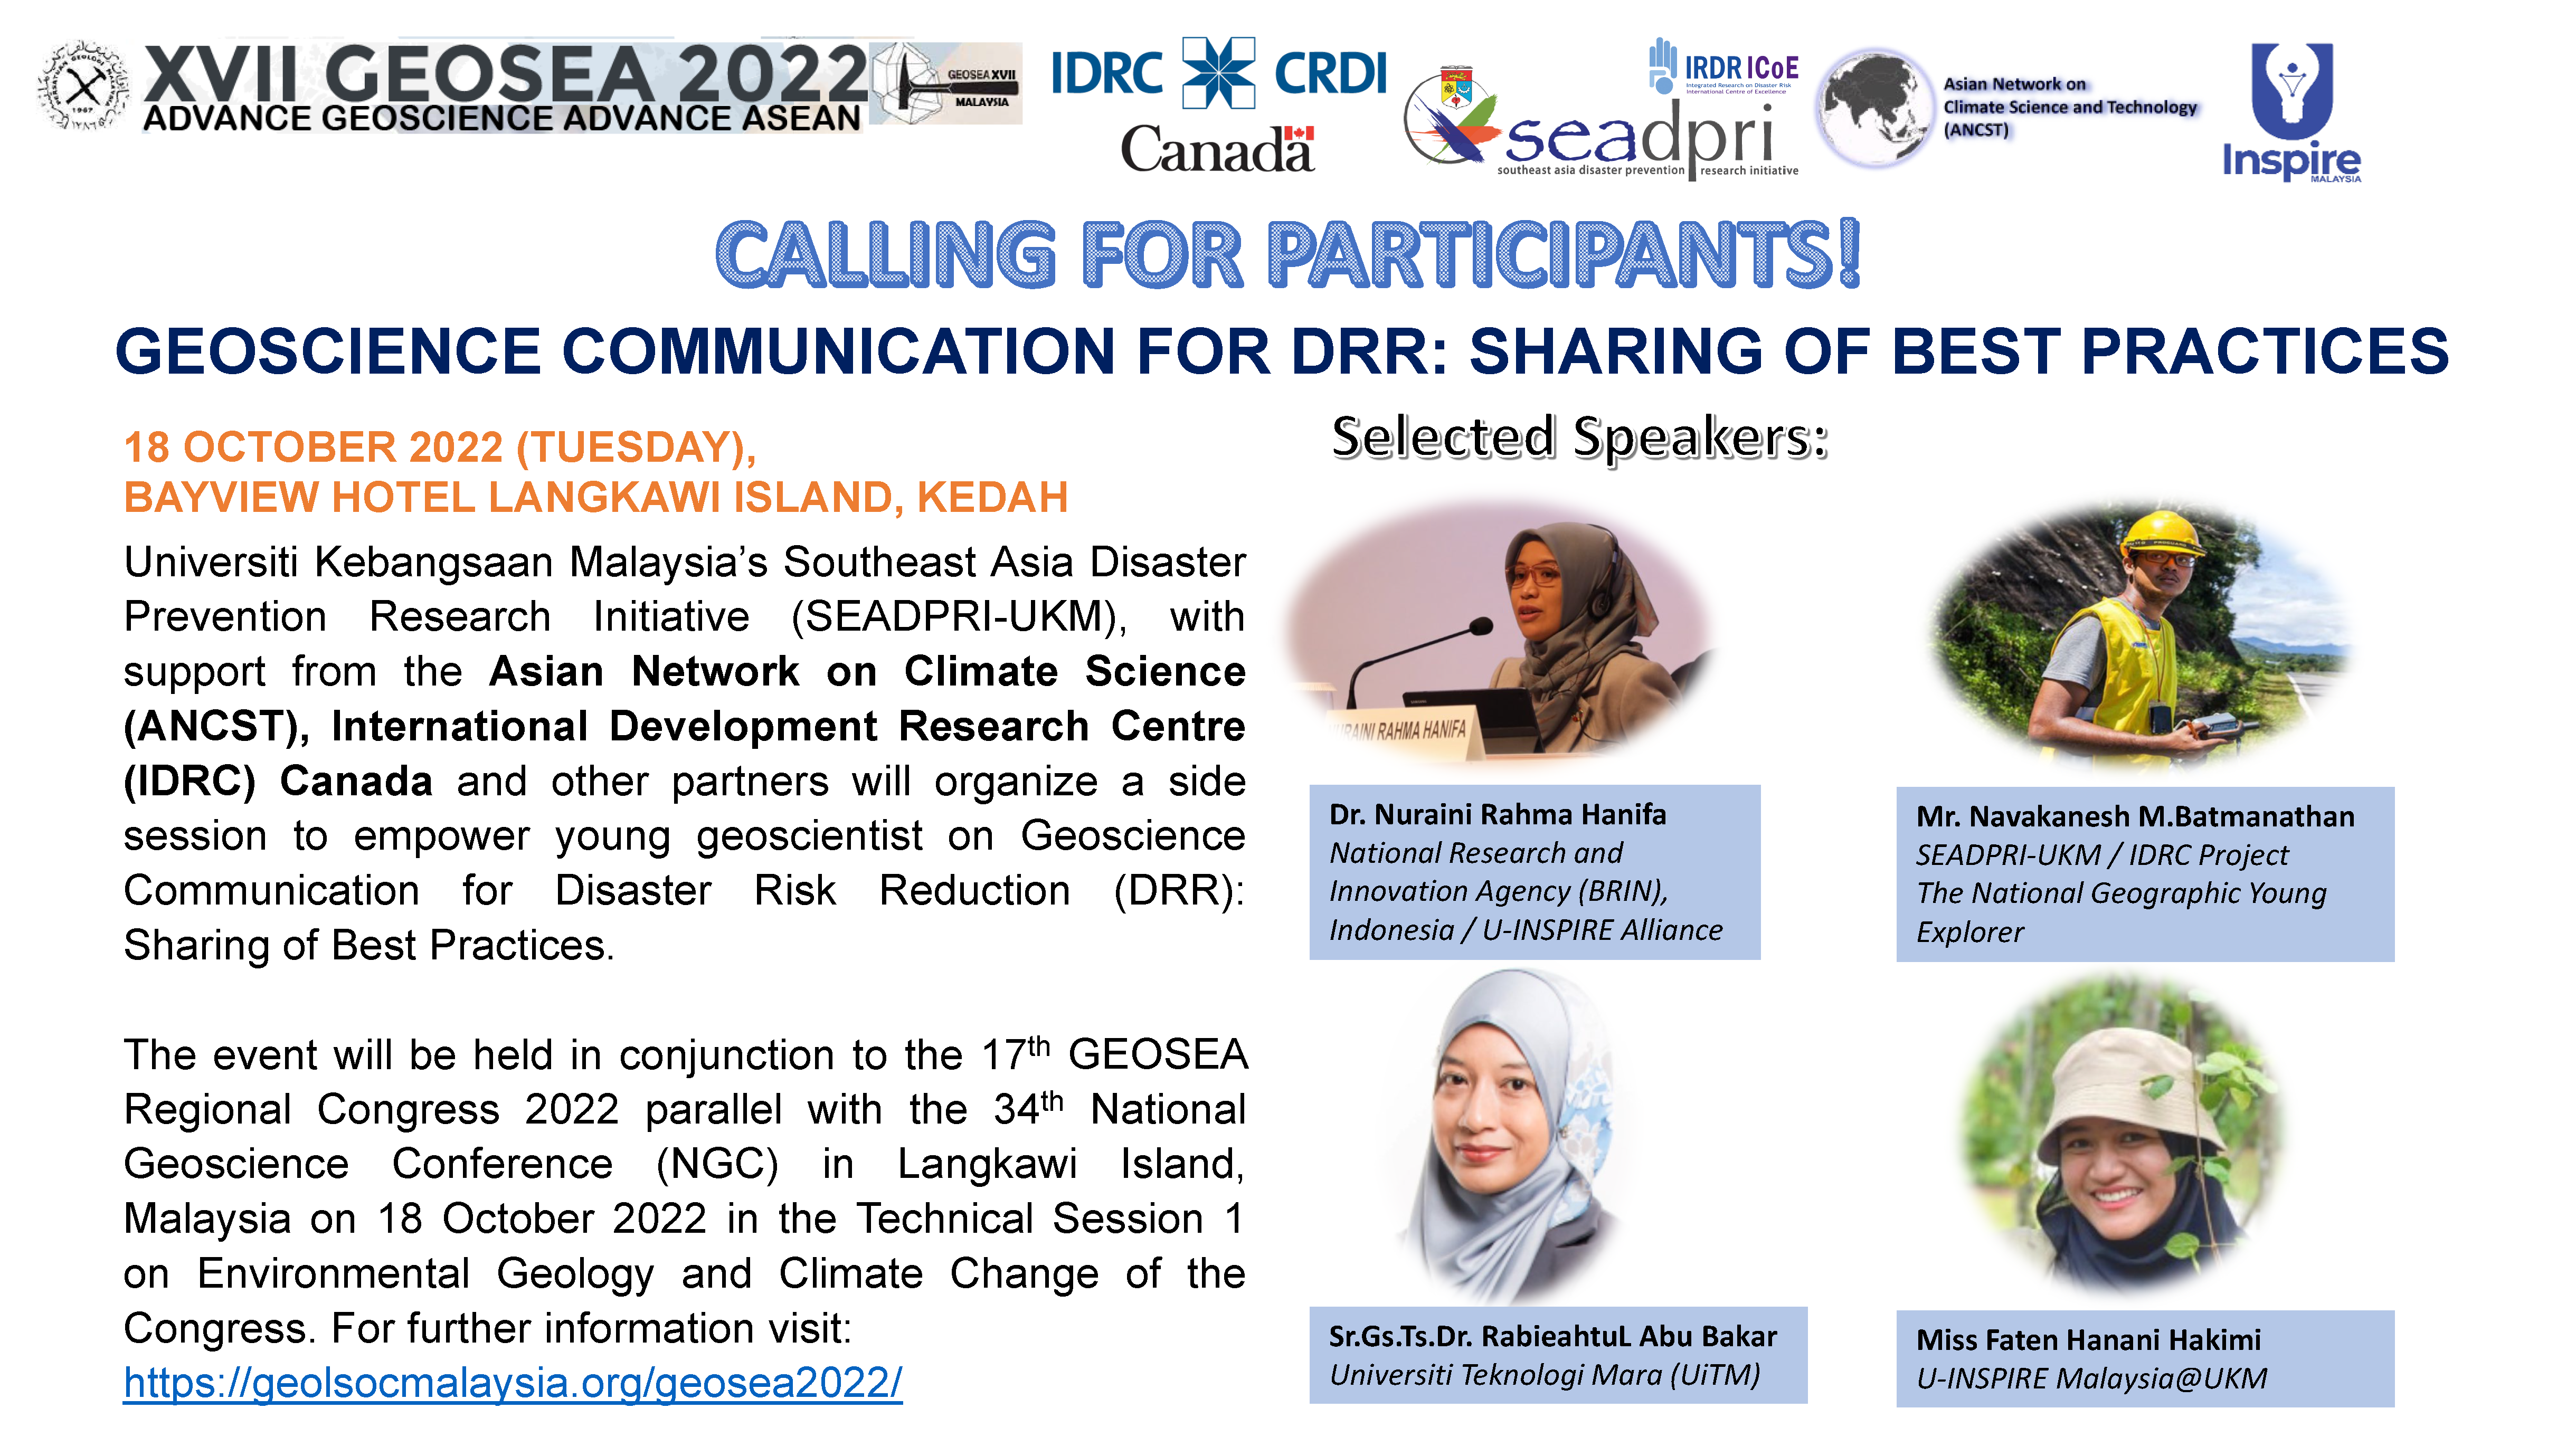 Geoscience Communication For DRR: Sharing of Best Practices [Calling for Participants]